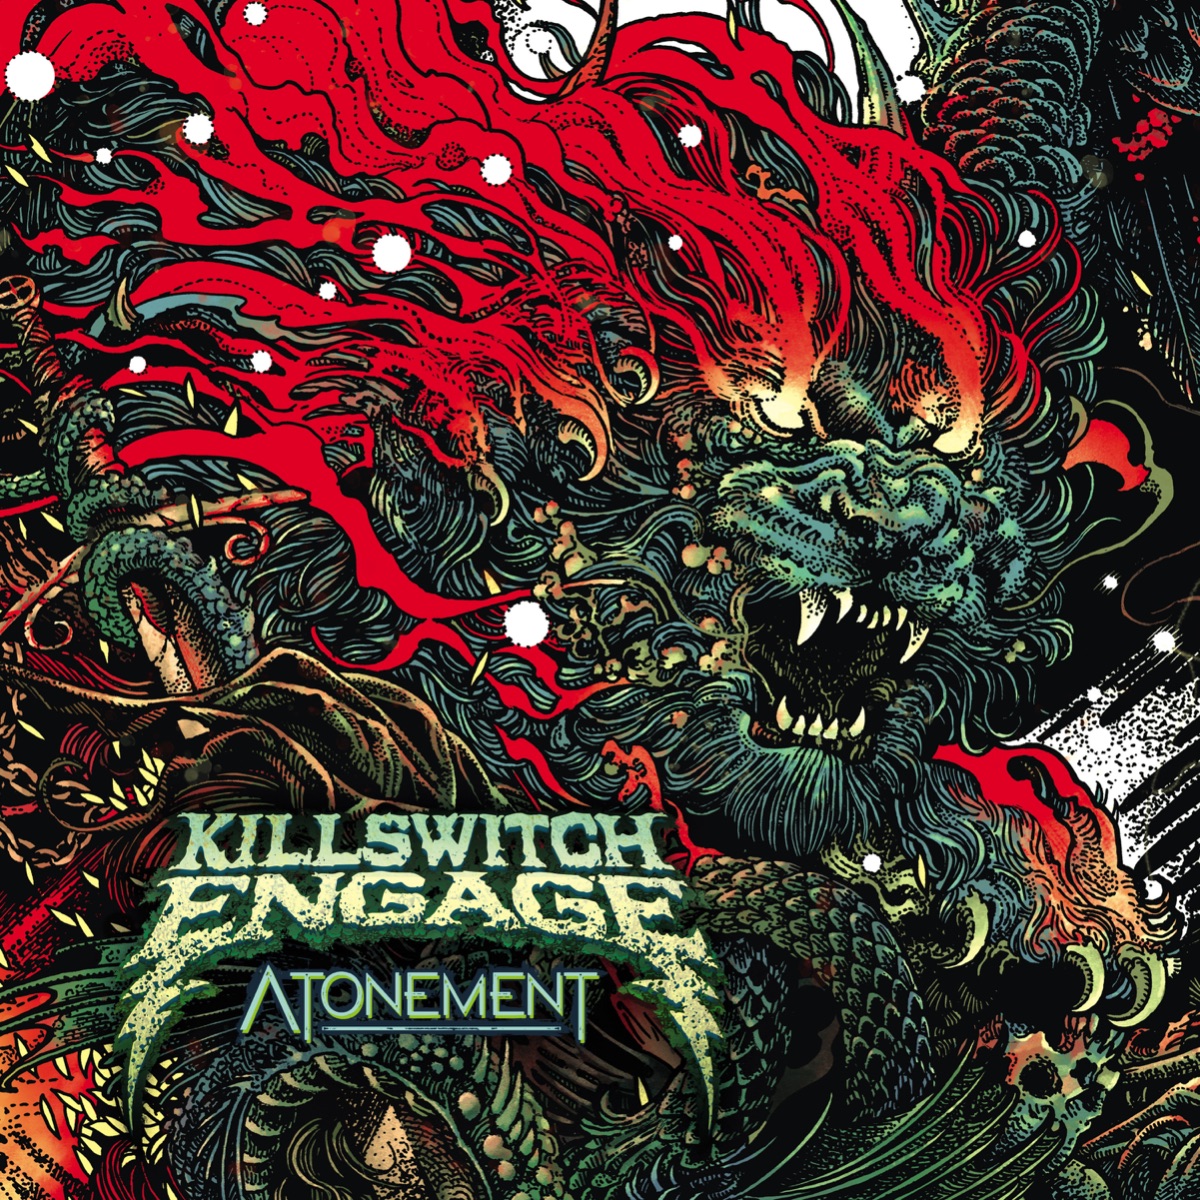 Killswitch Engage Announce New Album "Atonement" Out 8/16, Band Drops New Song "Unleashed"